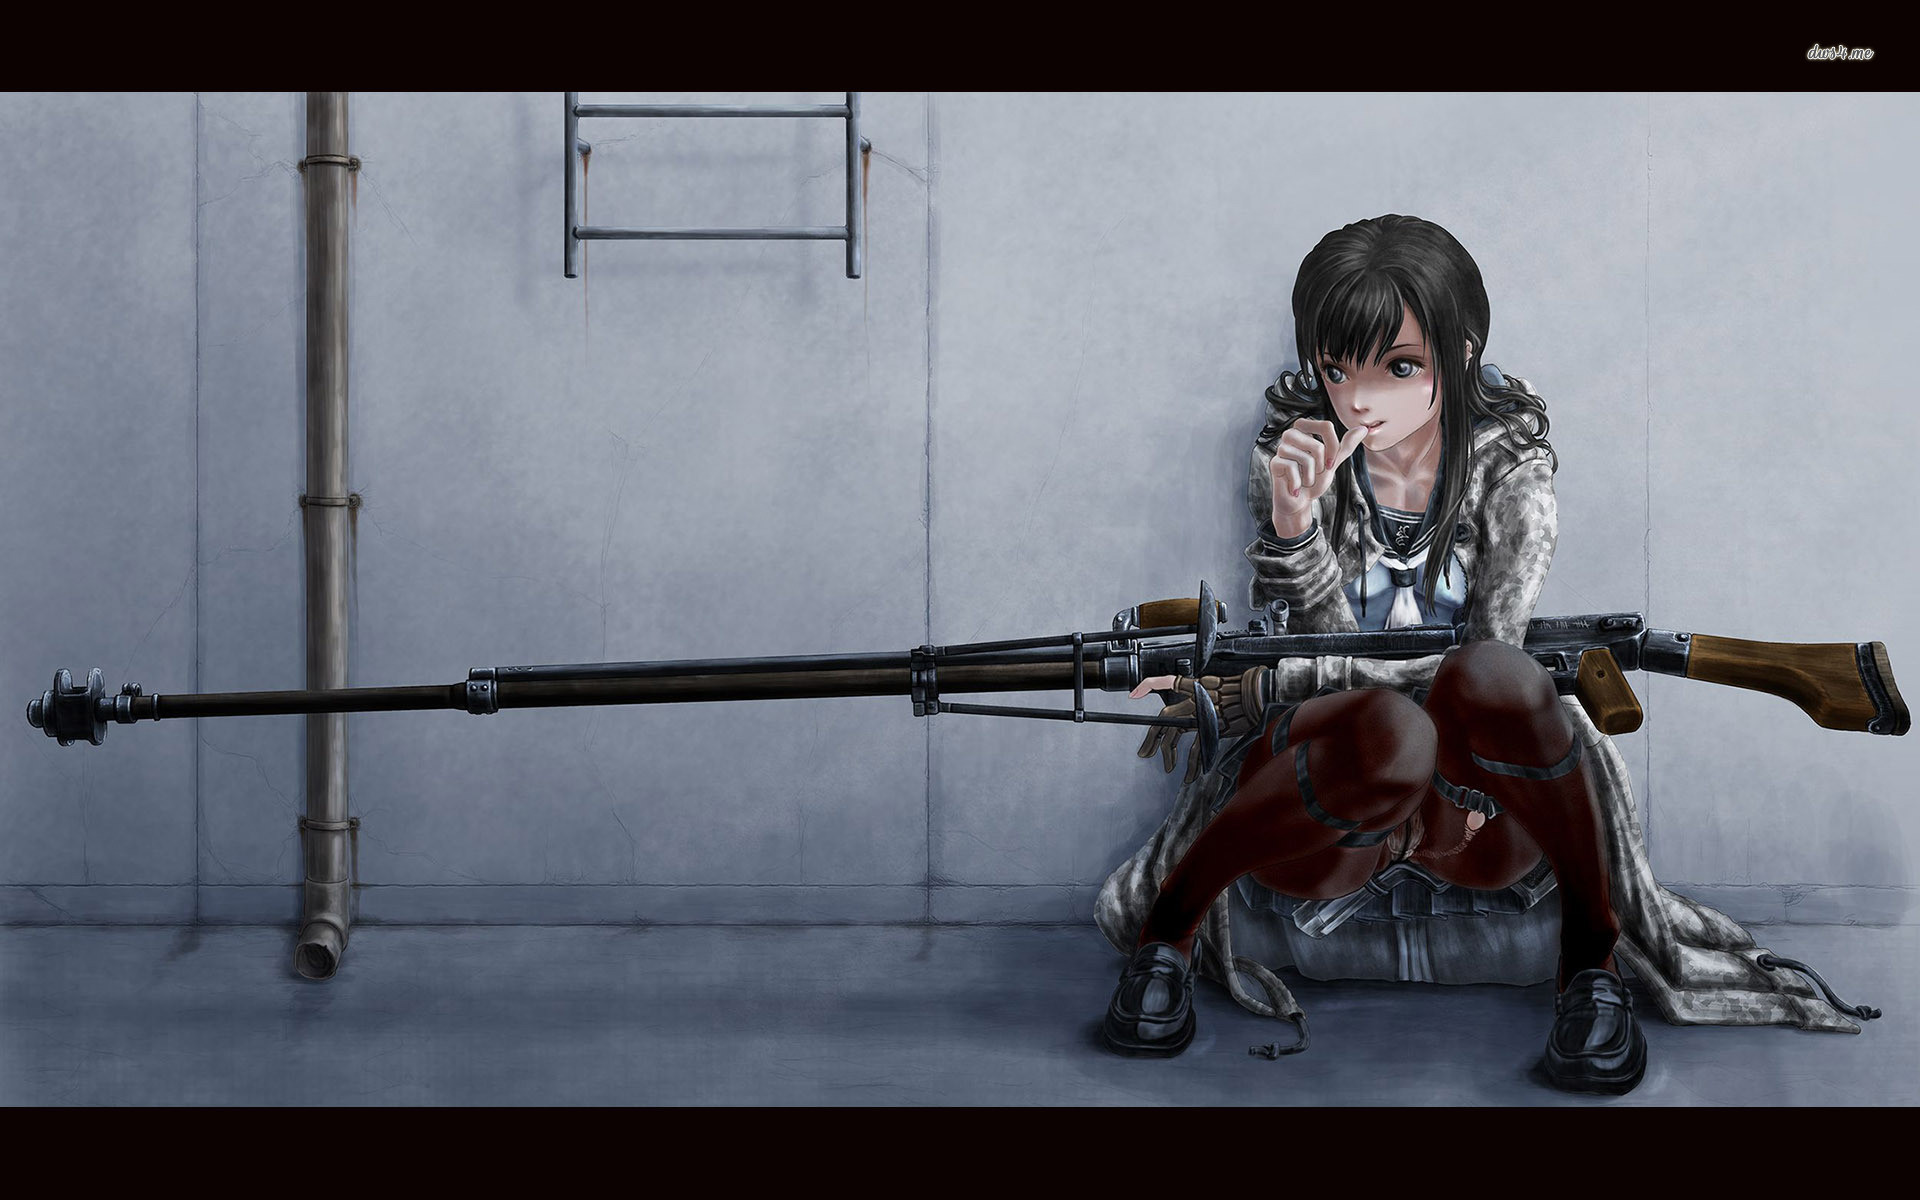 1920x1200 Anime Girl With A Sniper Rifle Wallpaper - Anime Wallpapers - #16823 |  •Animes mit Waffen• | Pinterest